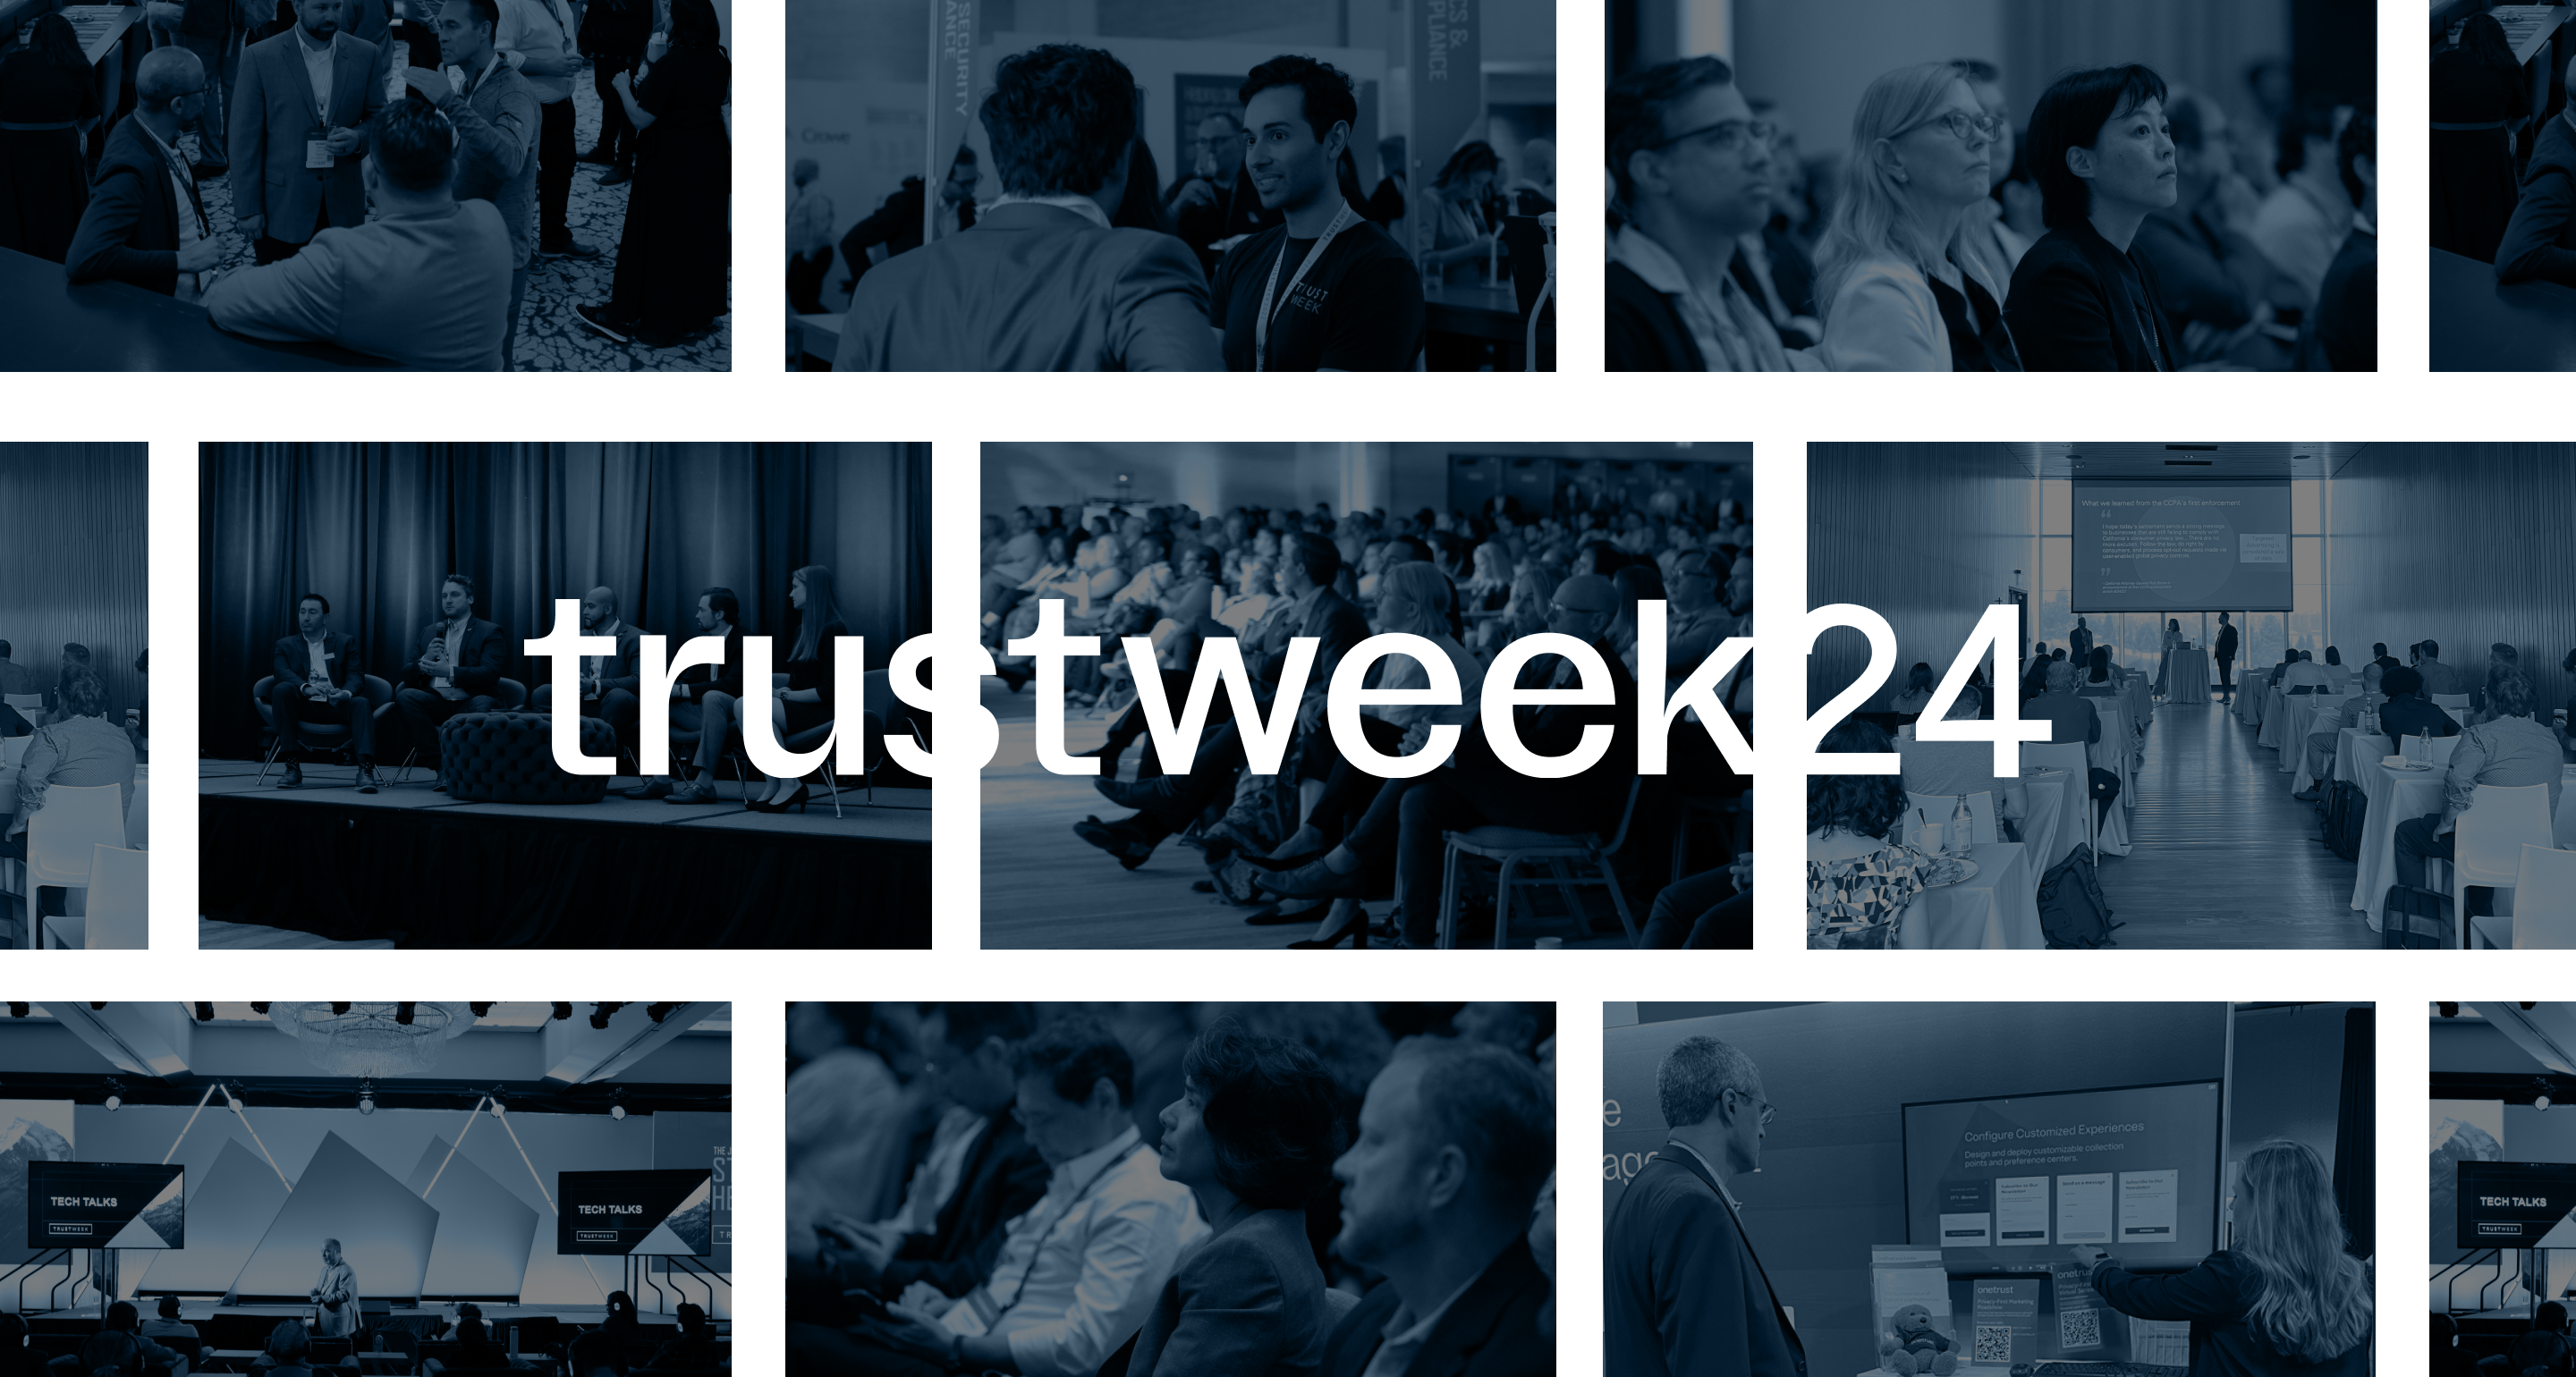 Collage of images showcasing people and events from past Trustweeks in a blue tone with the Trustweek 2024 logo overlaid in the center.